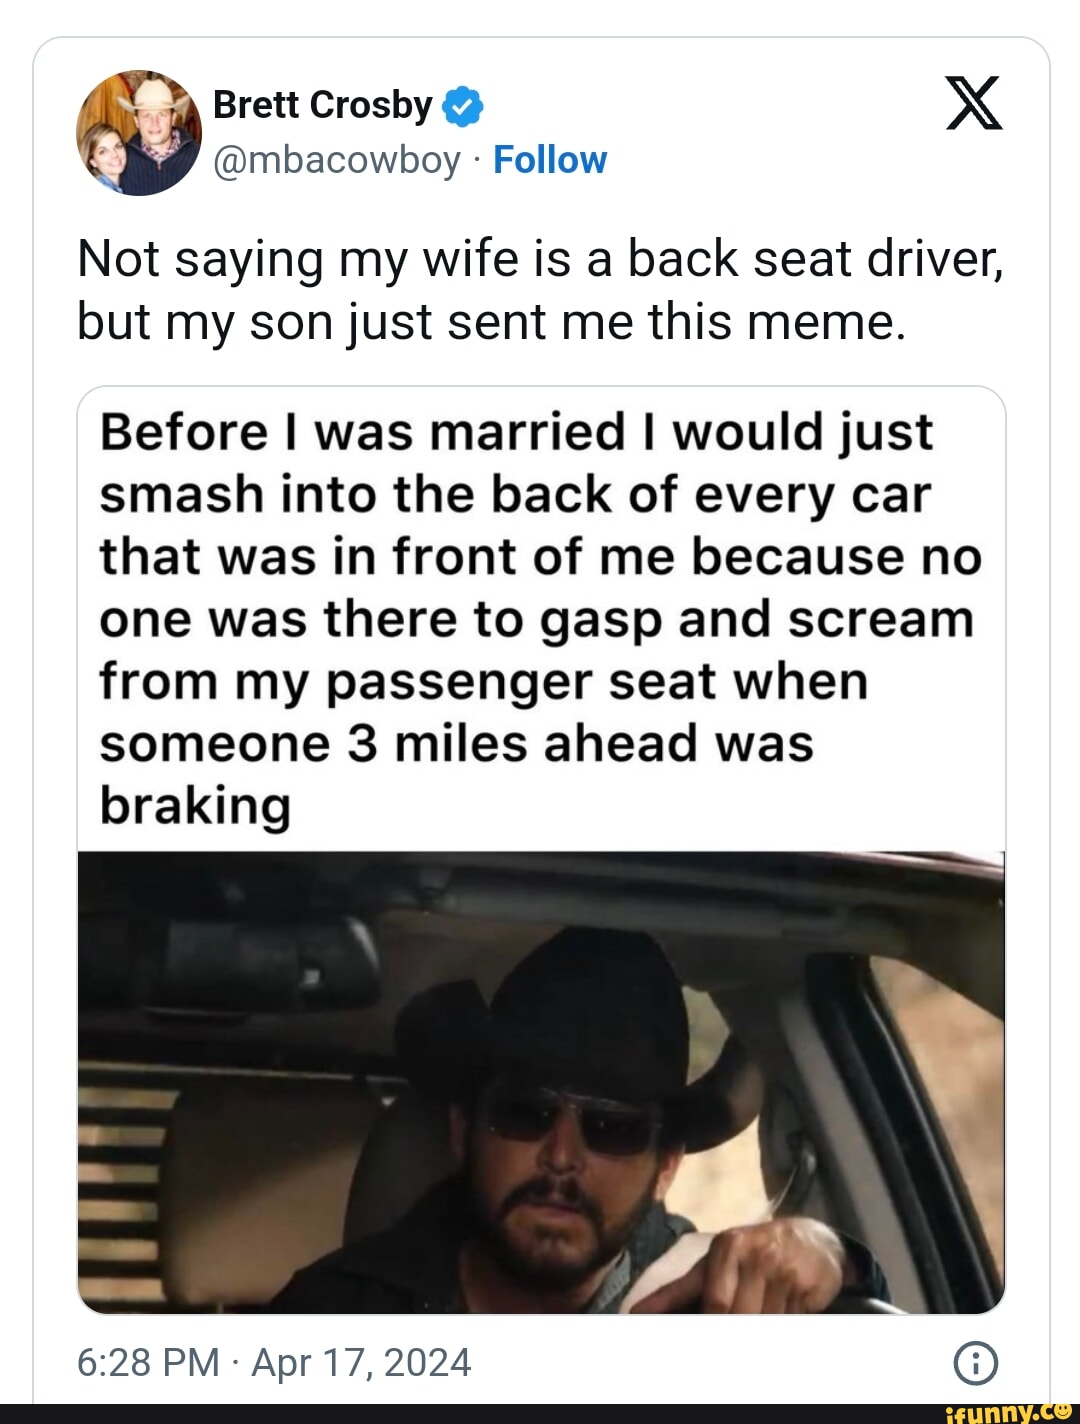 Brett Crosby @ XX @mbacowboy Follow Not saying my wife is a back seat driver, but my son just sent me this meme. Before I was married I would just smash into the back of every car that was in front of me because no one was there to gasp and scream from my passenger seat when someone 3 miles ahead was braking PM - Apr 17, 2024